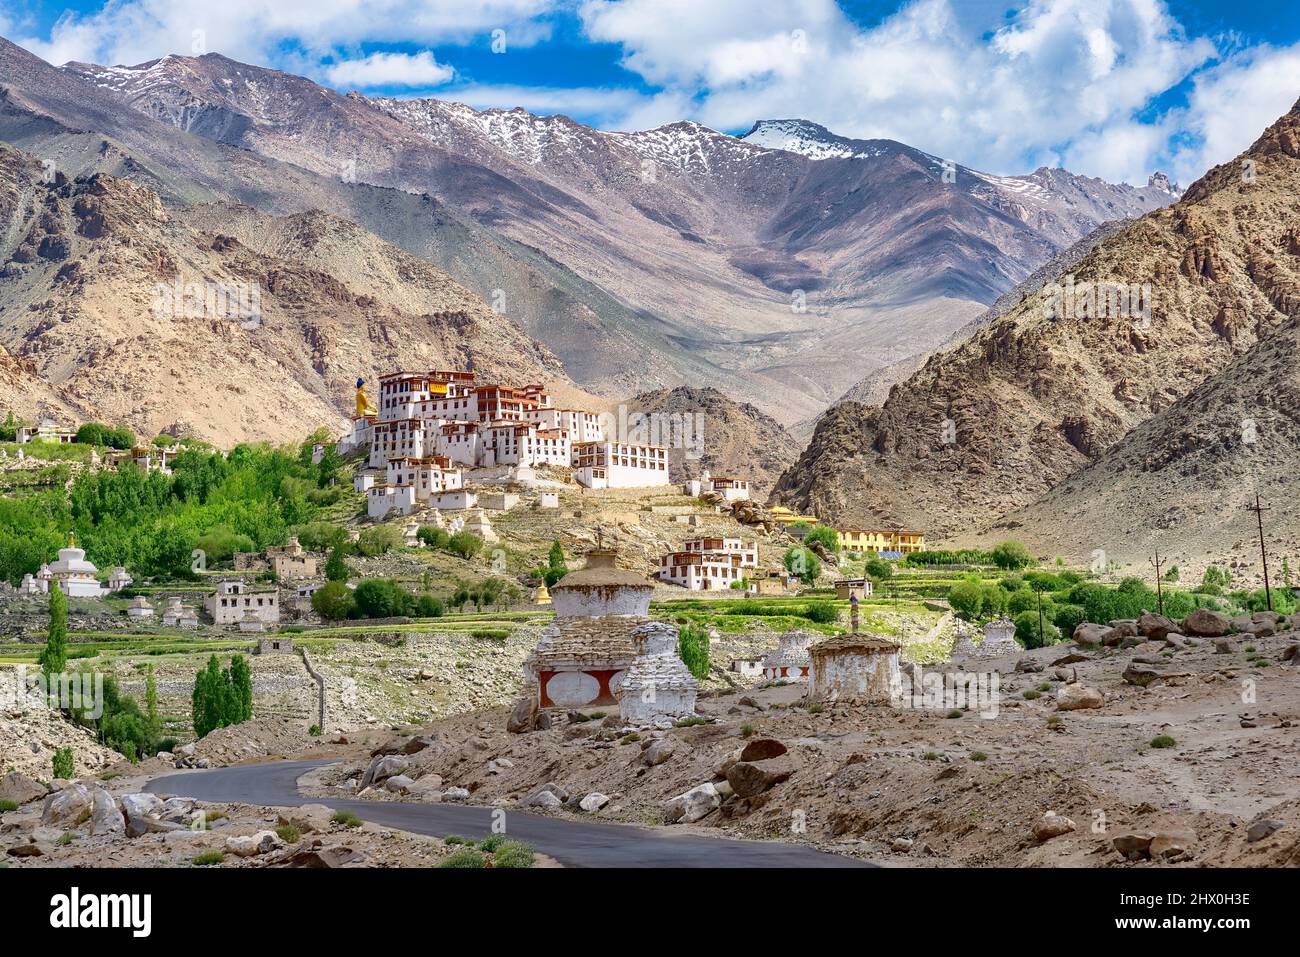 View of Likir Monastery in Ladakh region, India. This Buddhist monastery is located at 3700 m elevation Stock Photo